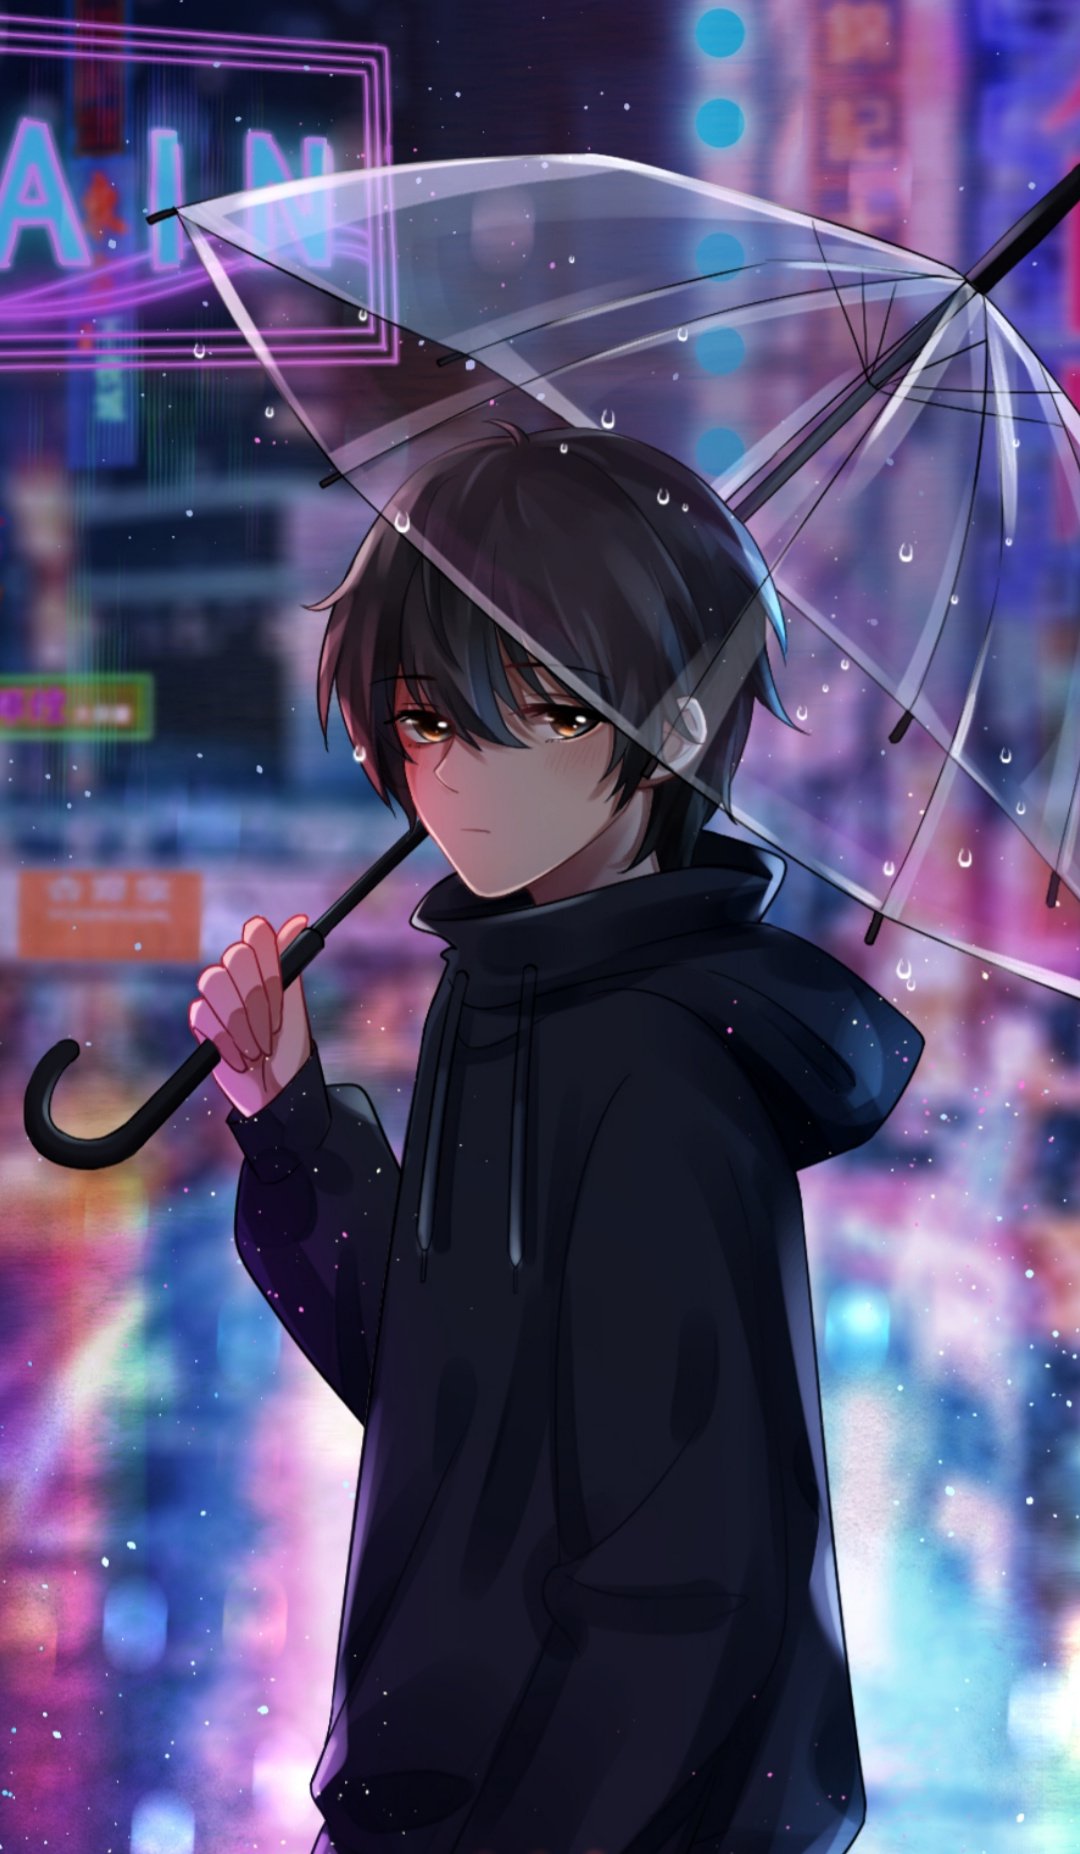 Aesthetic Anime Boy Cute Wallpapers - Wallpaper Cave